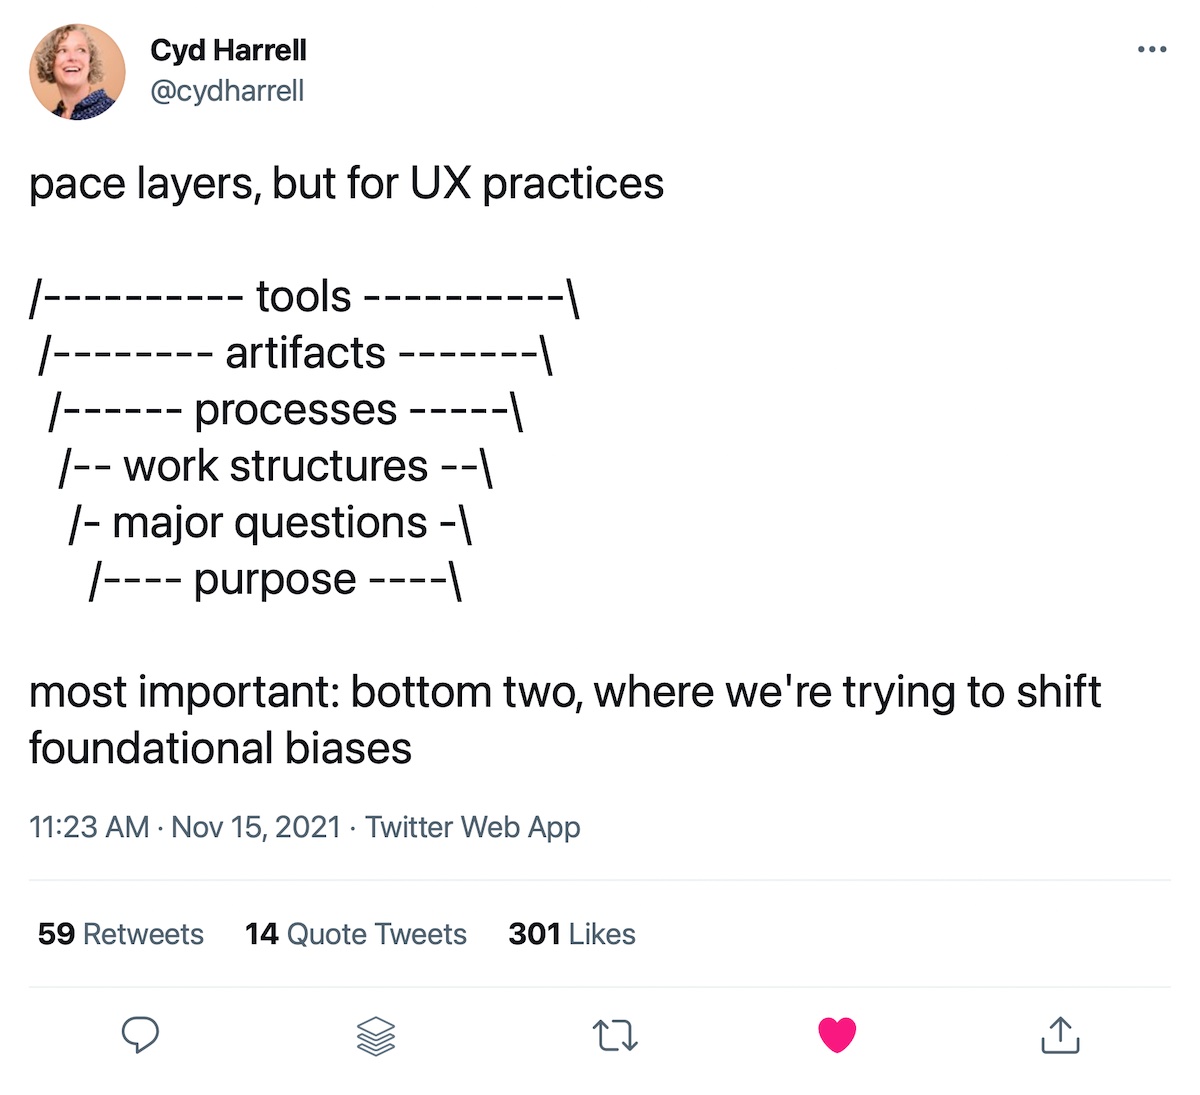 Tweet by Cyd Harrell: UX practices pace layers